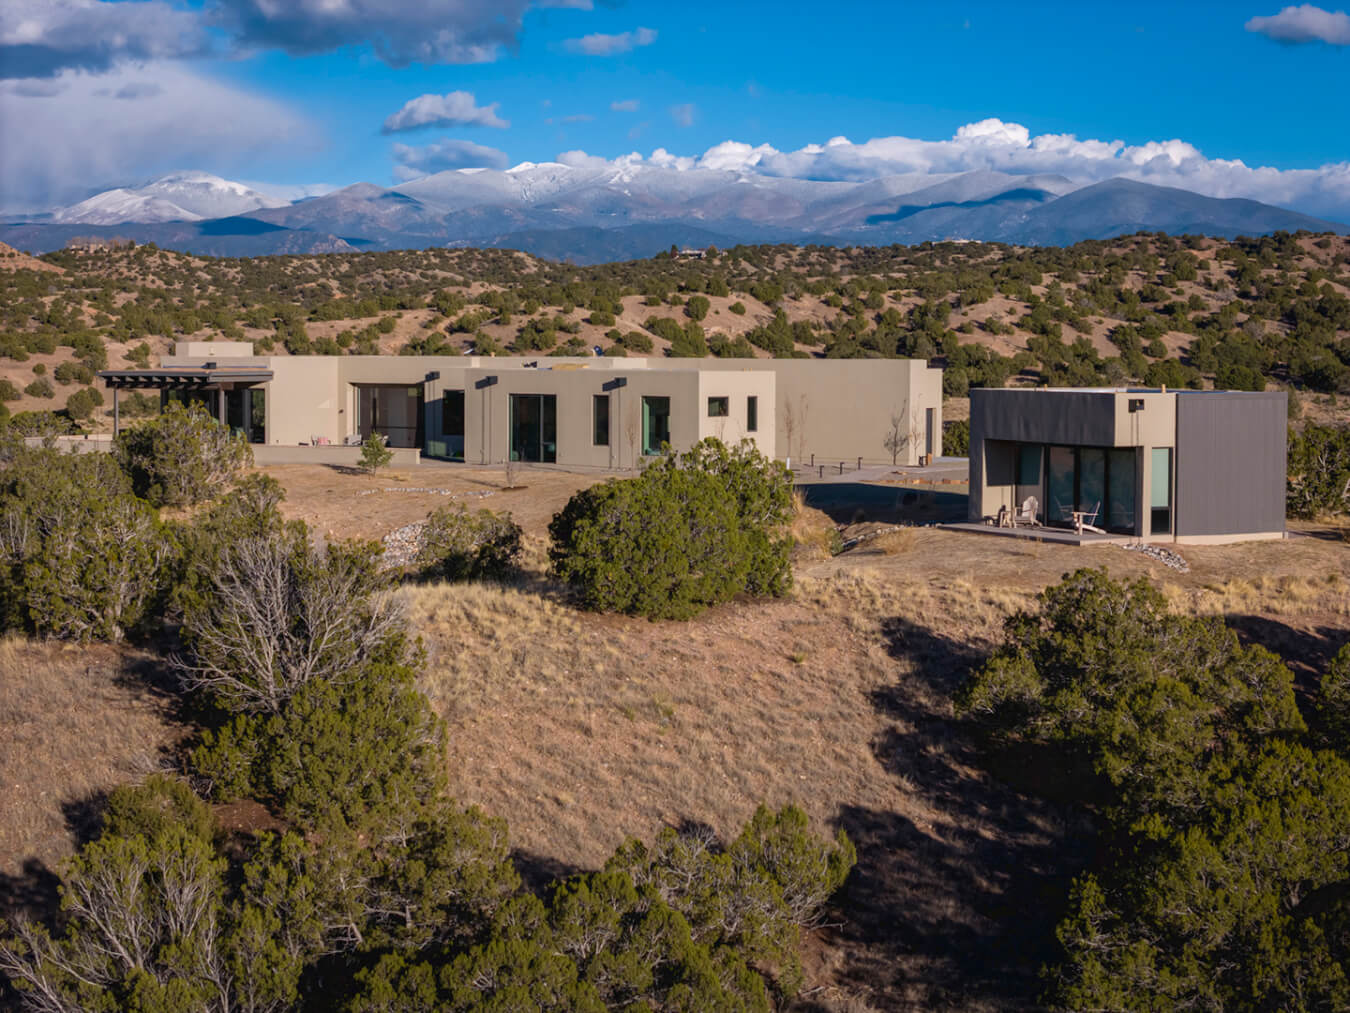 A modern Santa Fe-style home in the desert with mountains in the background.